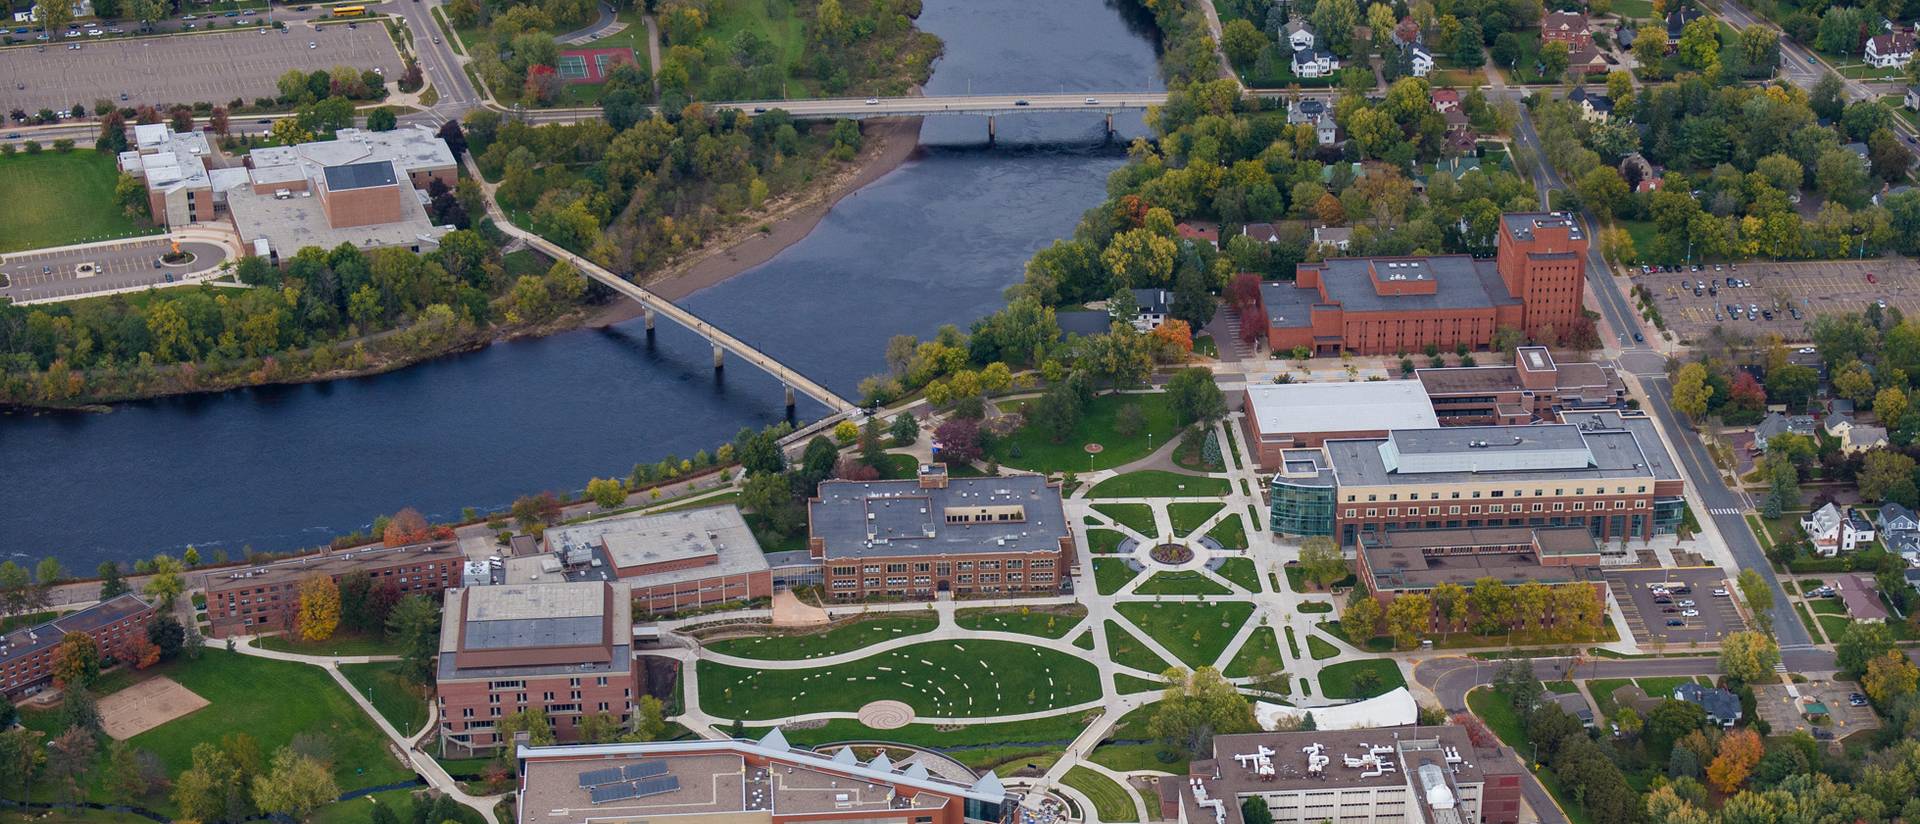 Aerial view of lower UW-Eau Claire campus